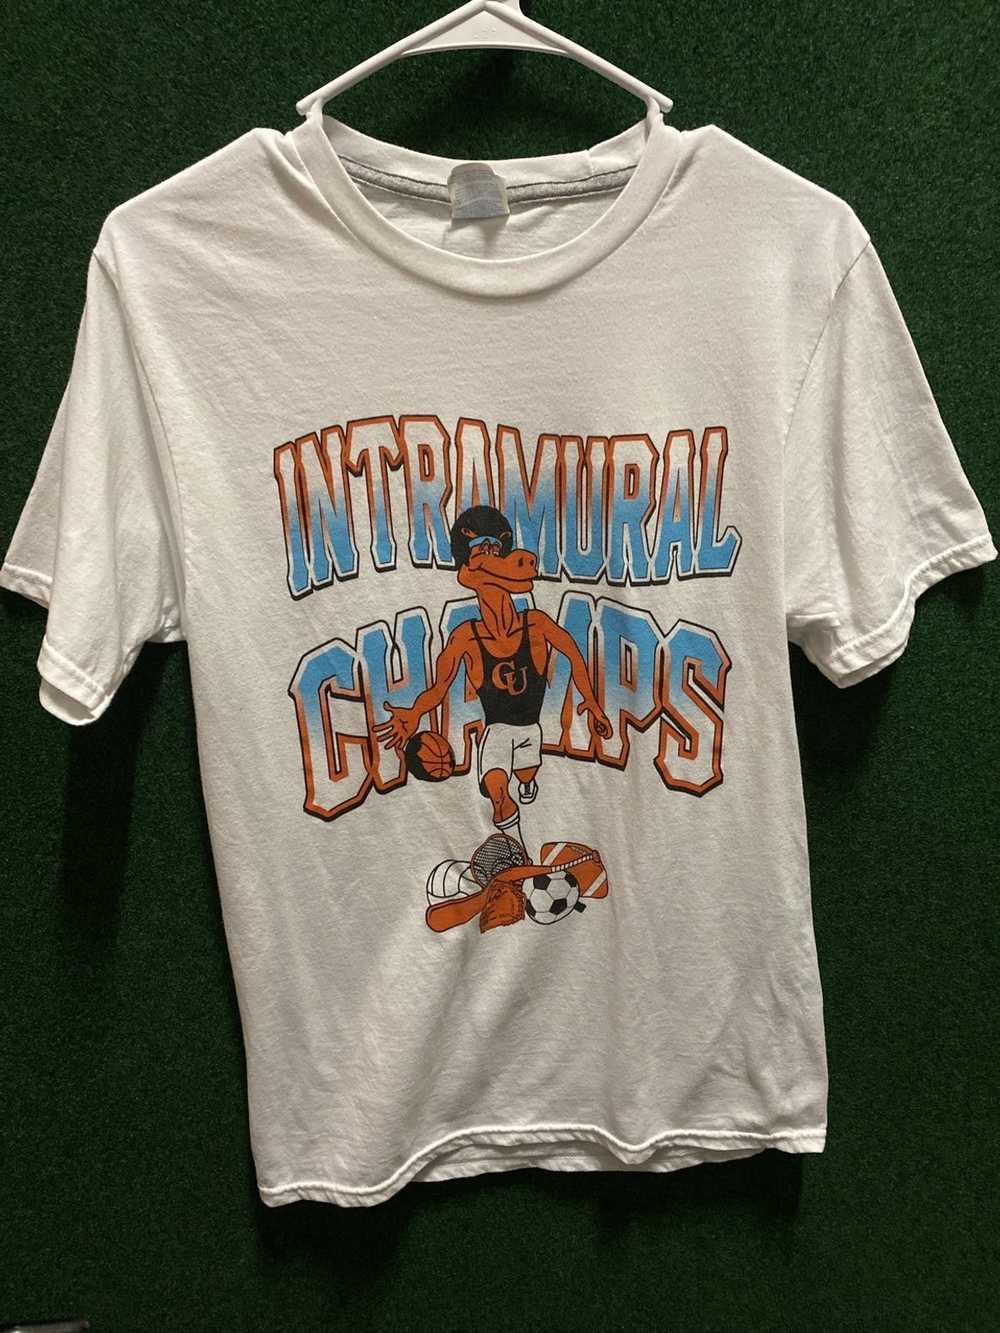 Vintage Campbell University Intramural Champs Tee - image 1